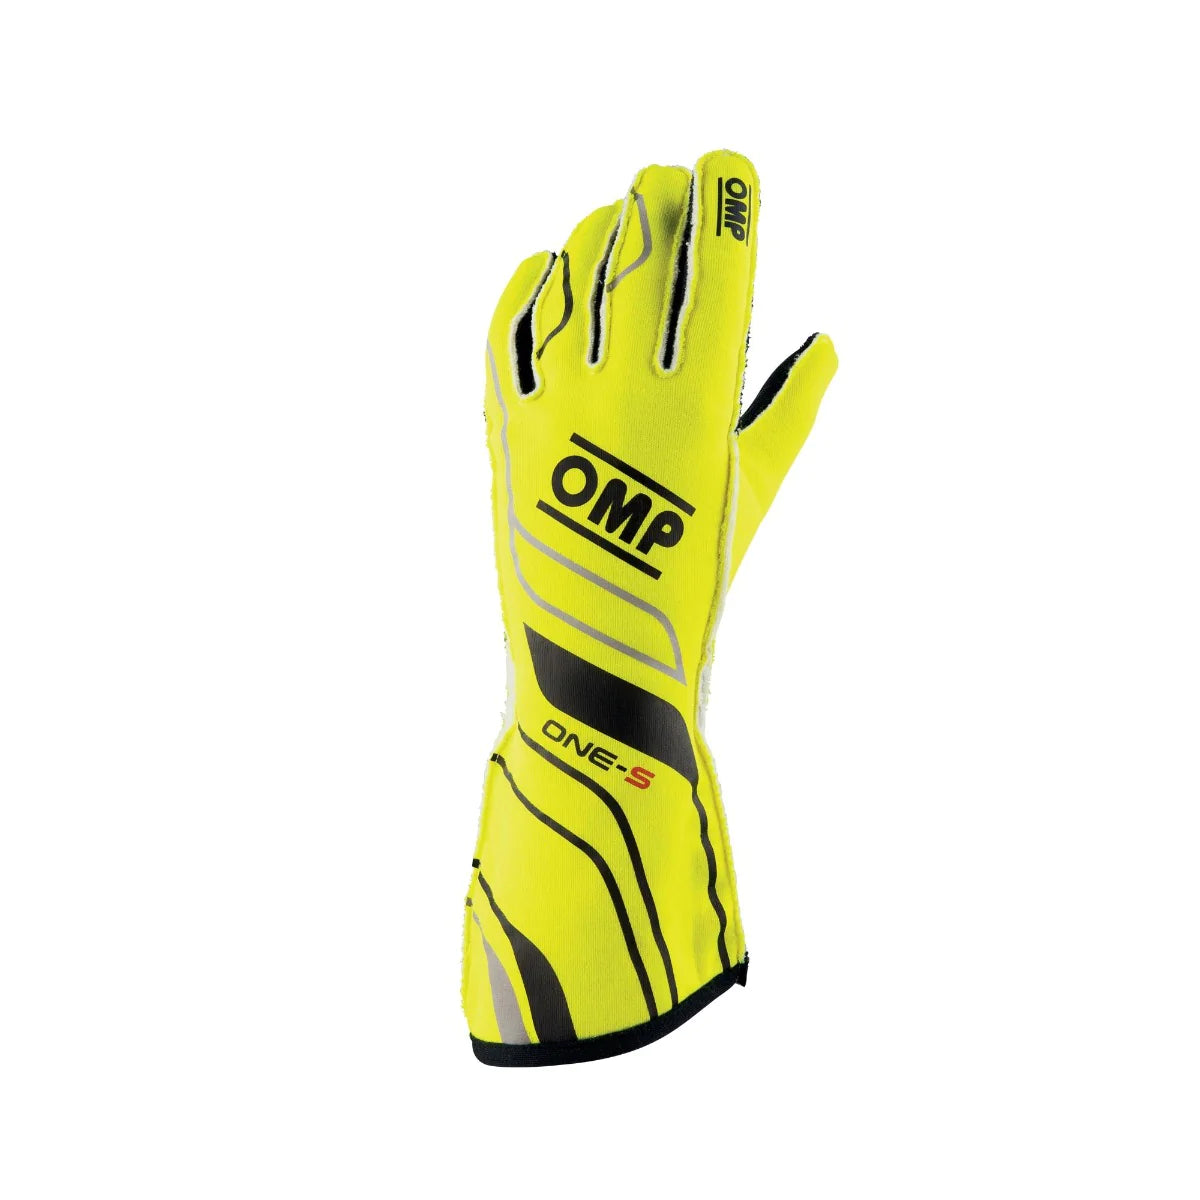 OMP ONE-S Nomex Gloves